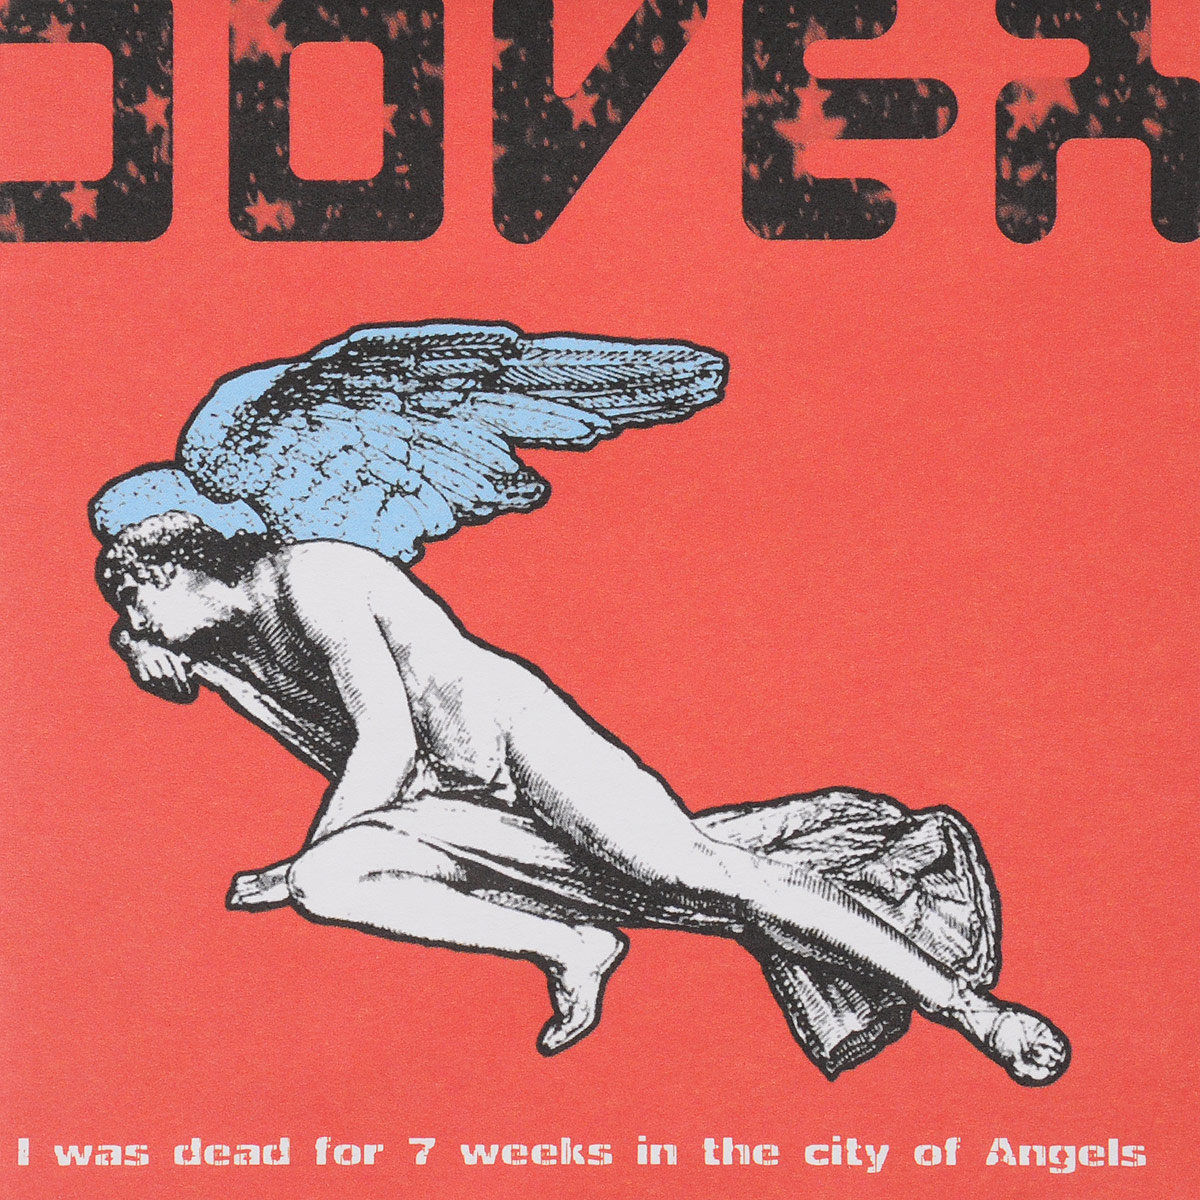 Dover. I Was Dead For 7 Weeks In The City Of Angels